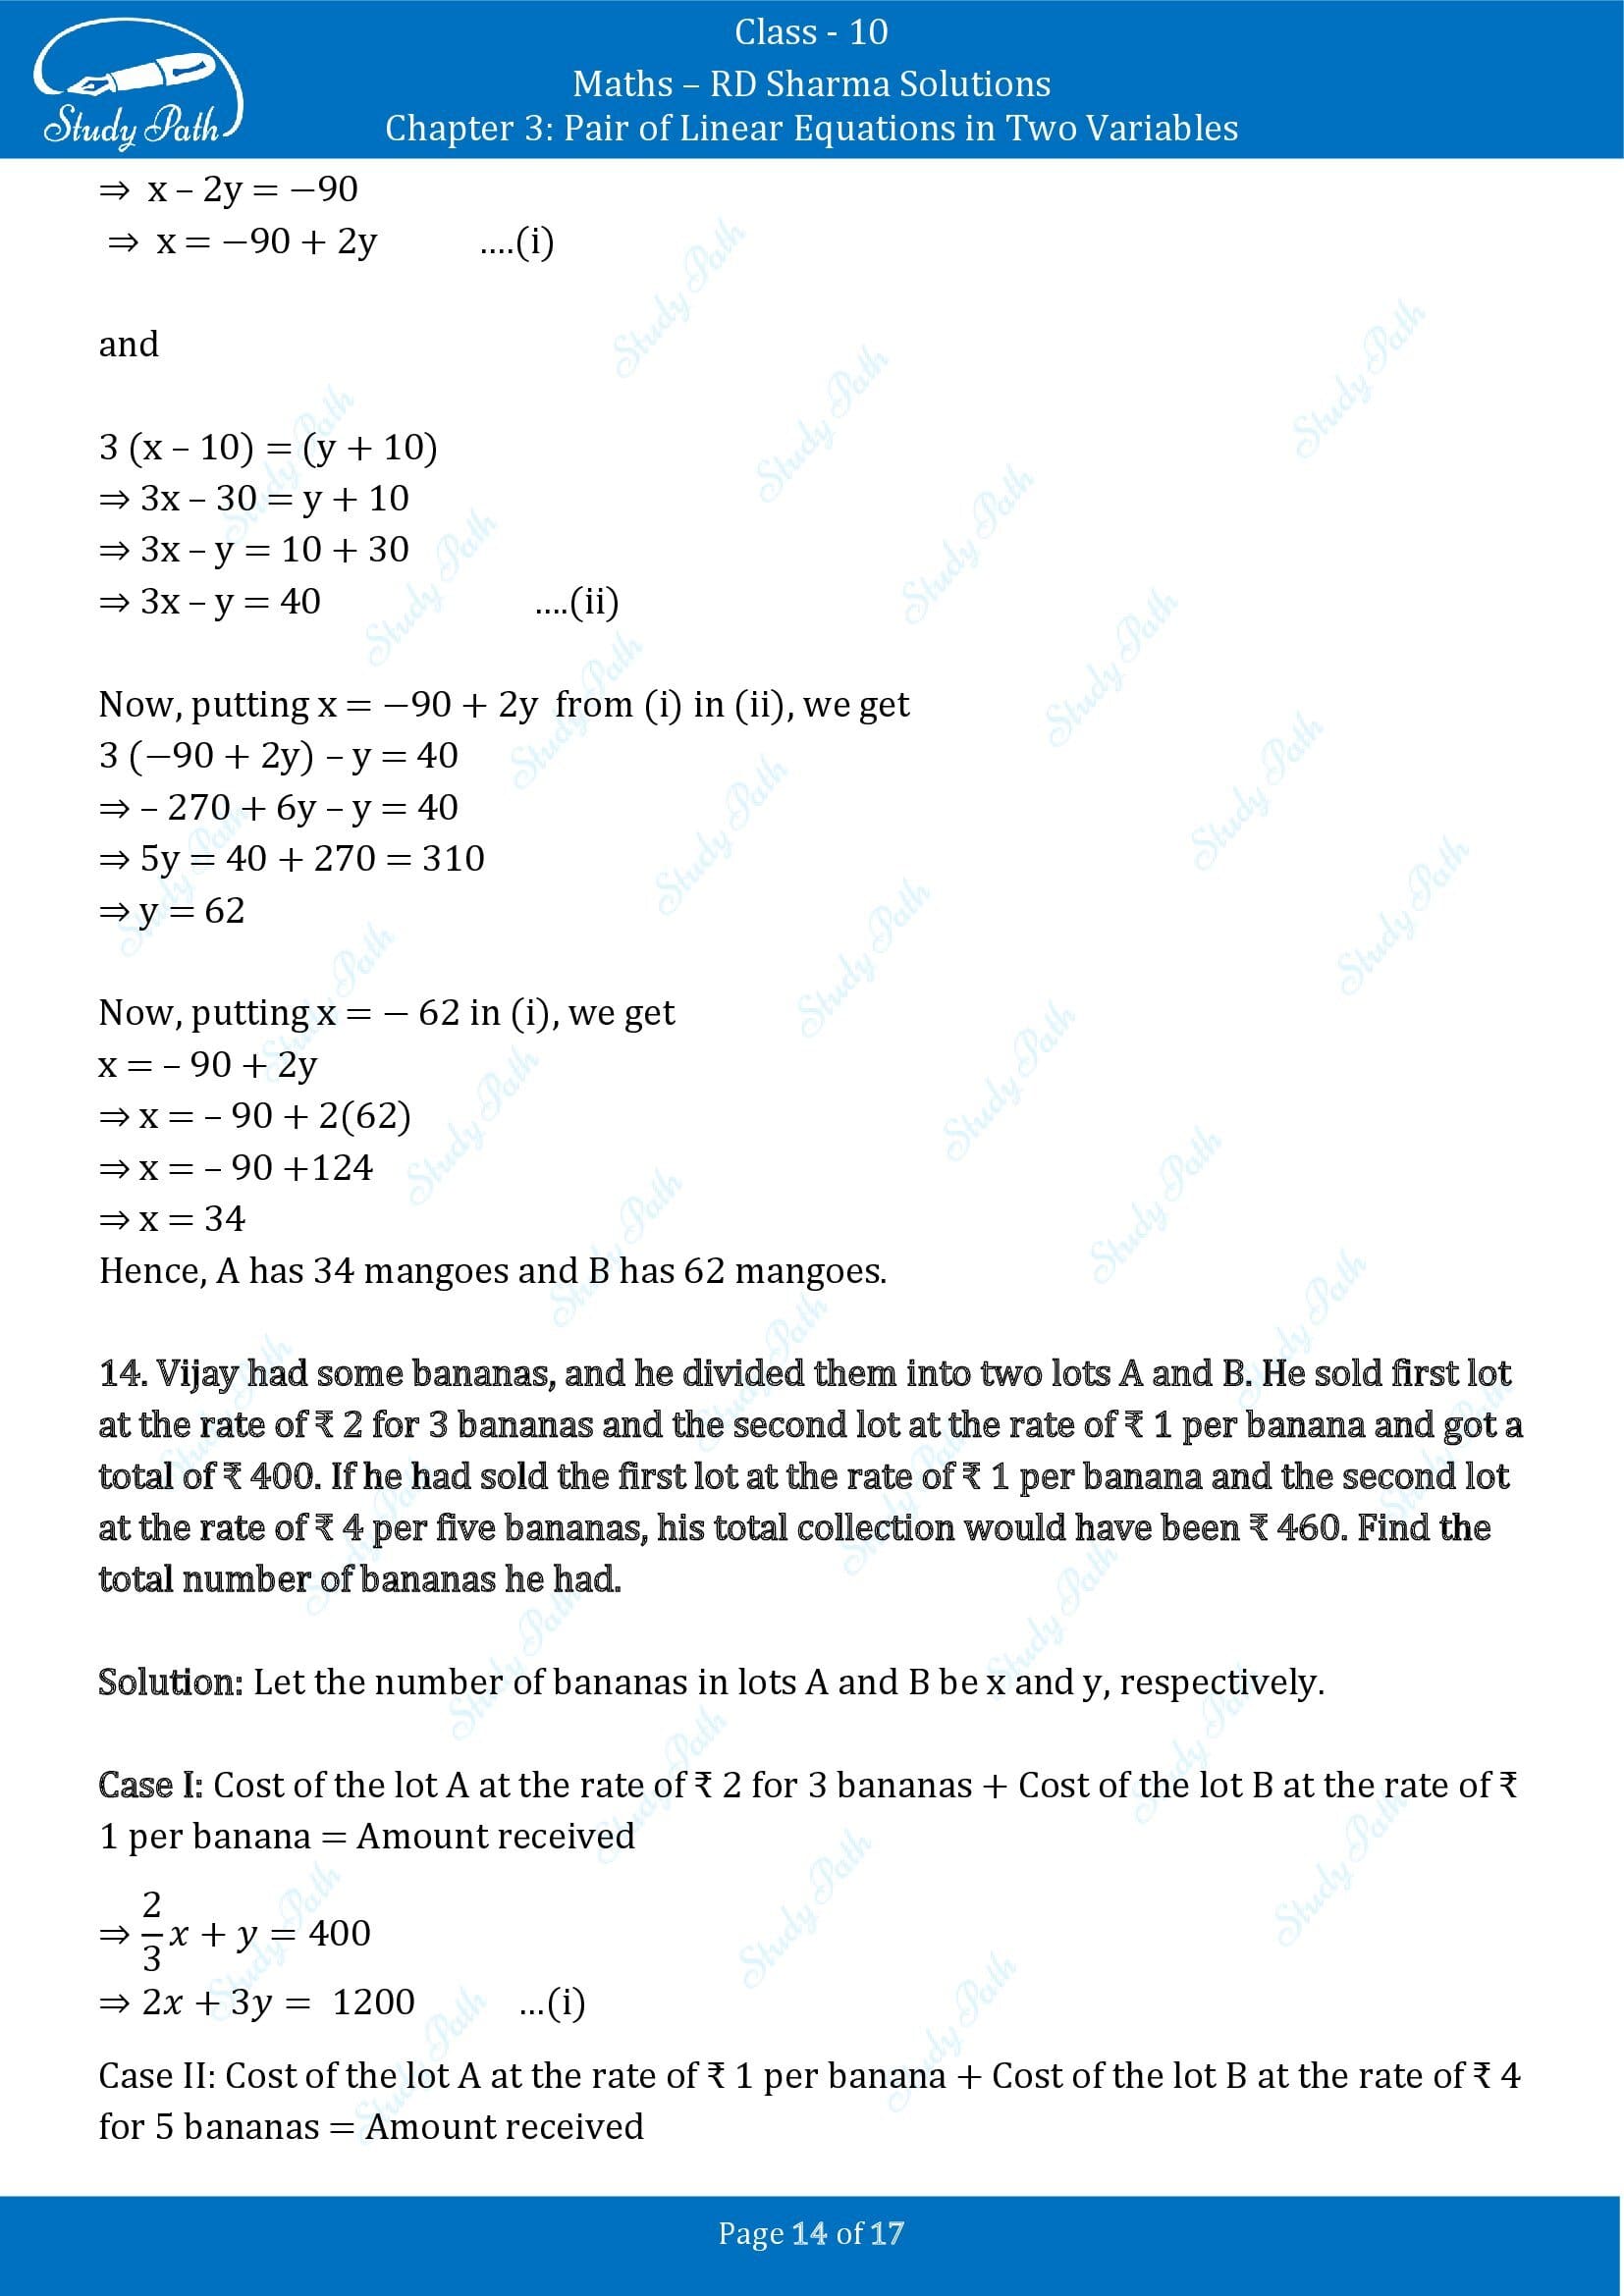 RD Sharma Solutions Class 10 Chapter 3 Pair of Linear Equations in Two Variables Exercise 3.6 00014